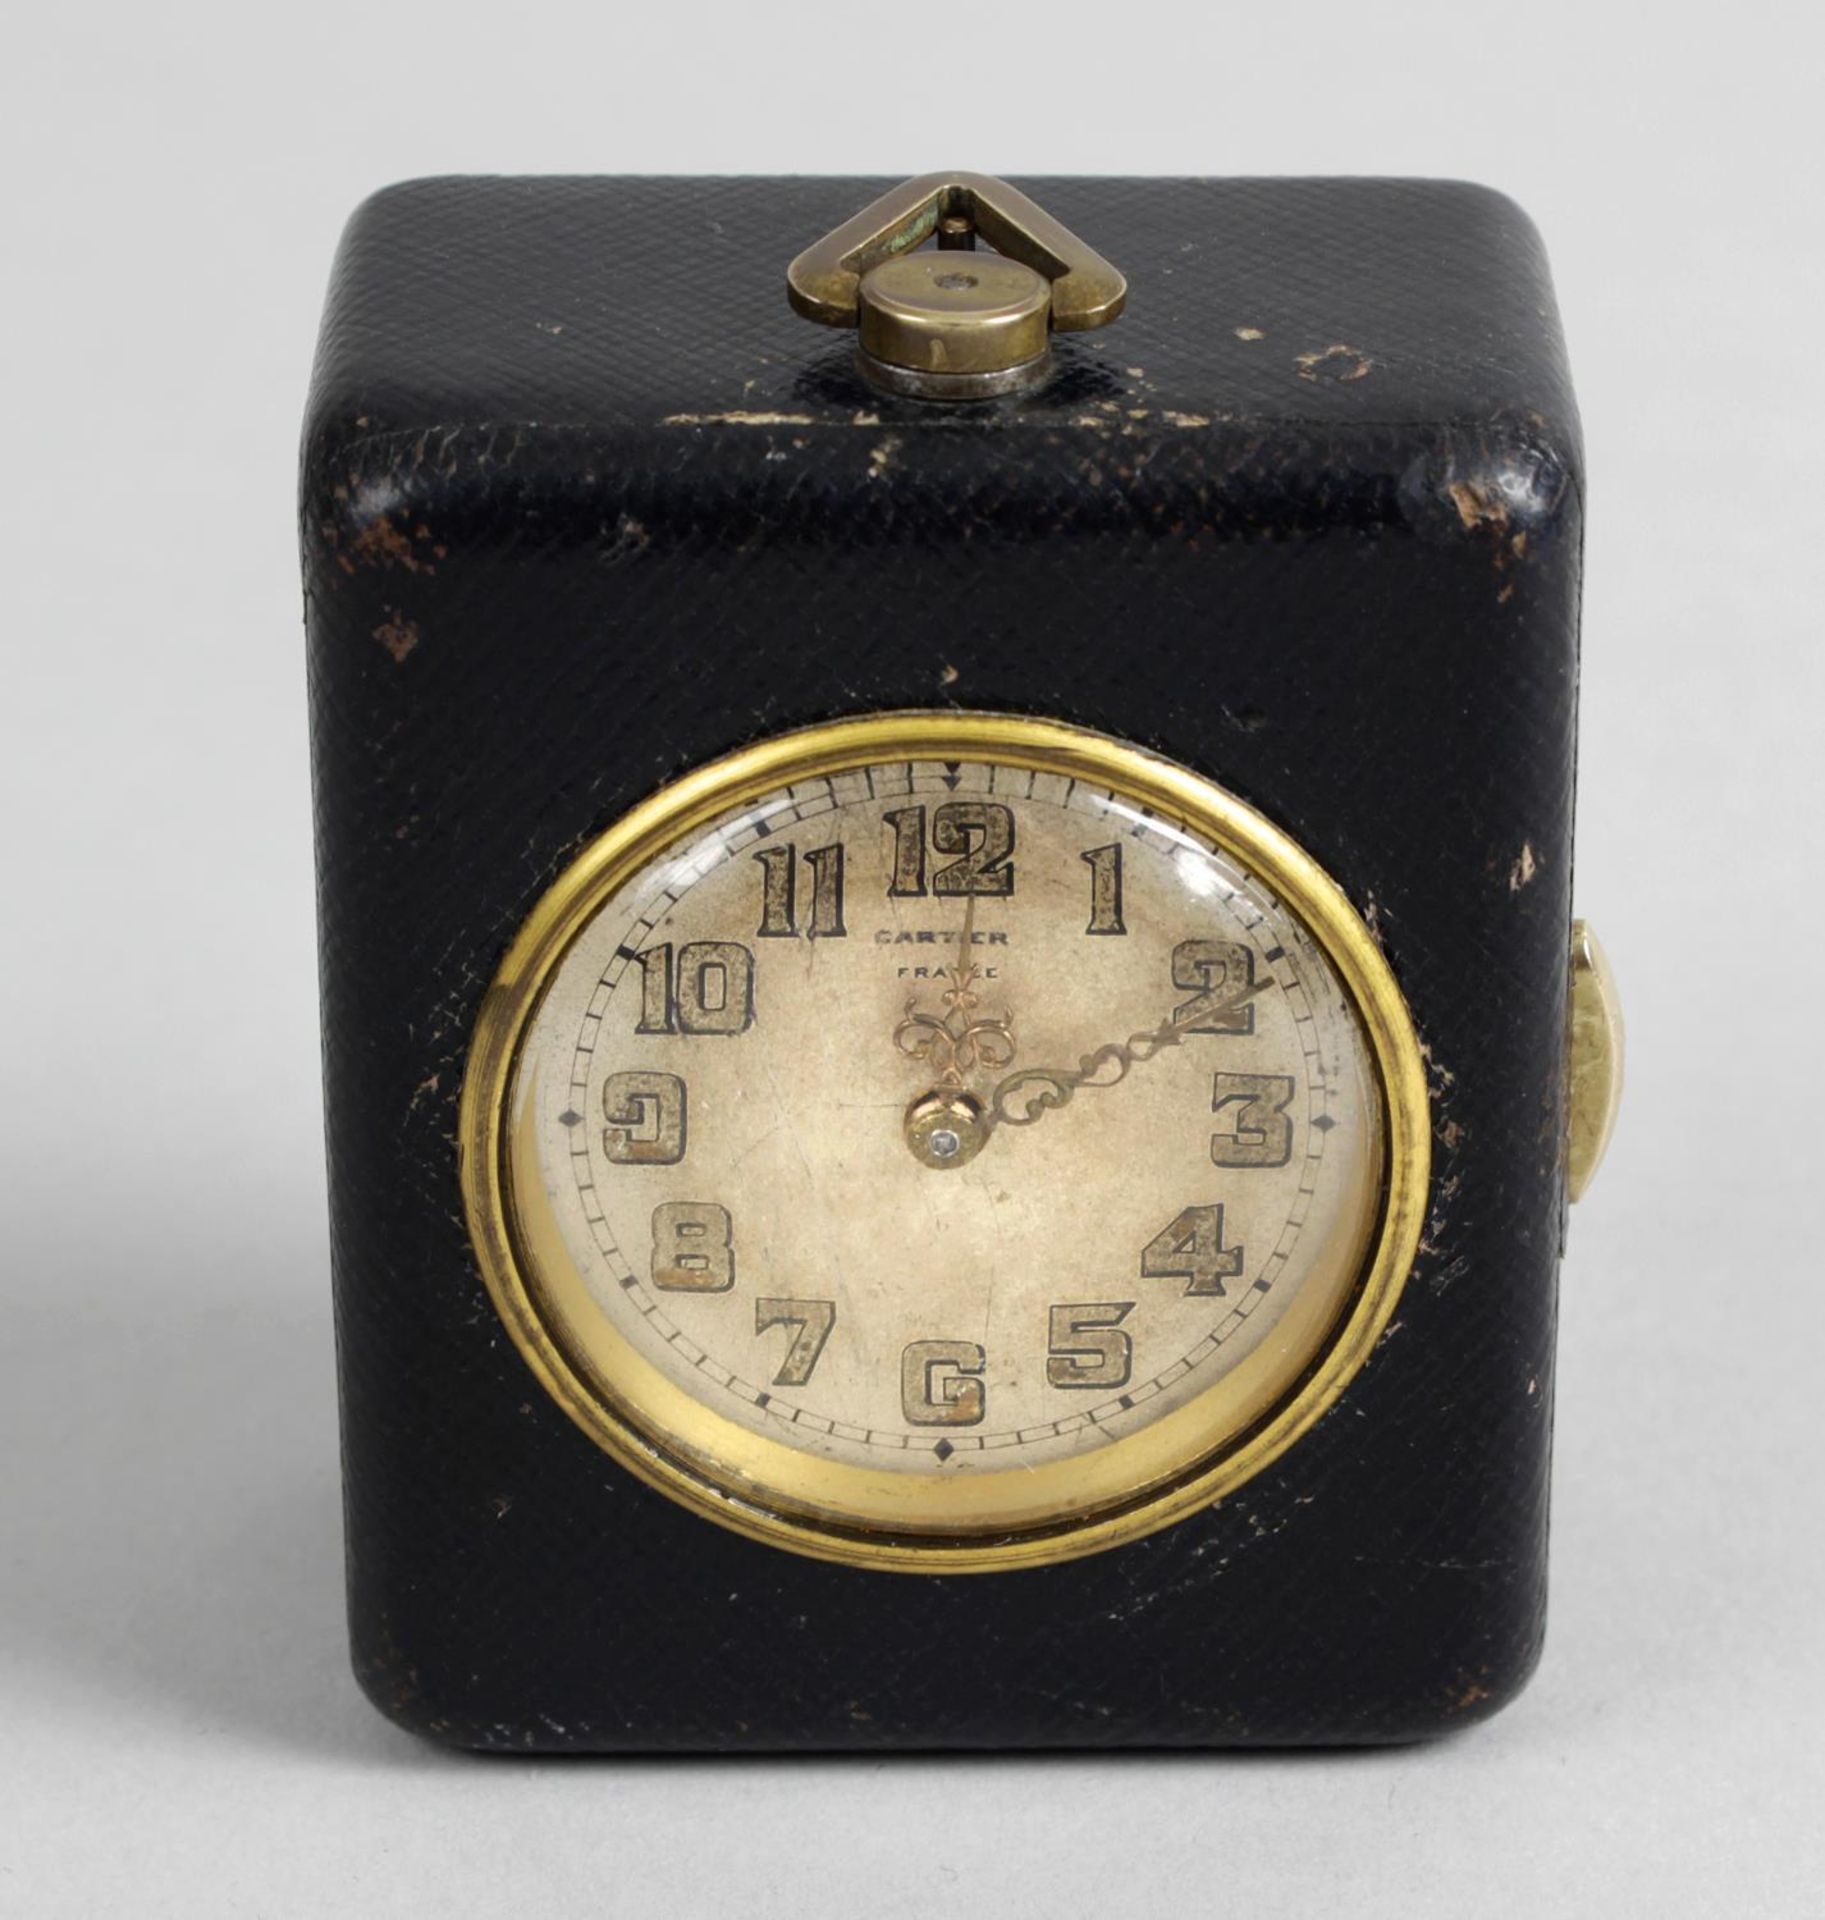 An unusual late 19th century/early 20th century pocket travel clock,